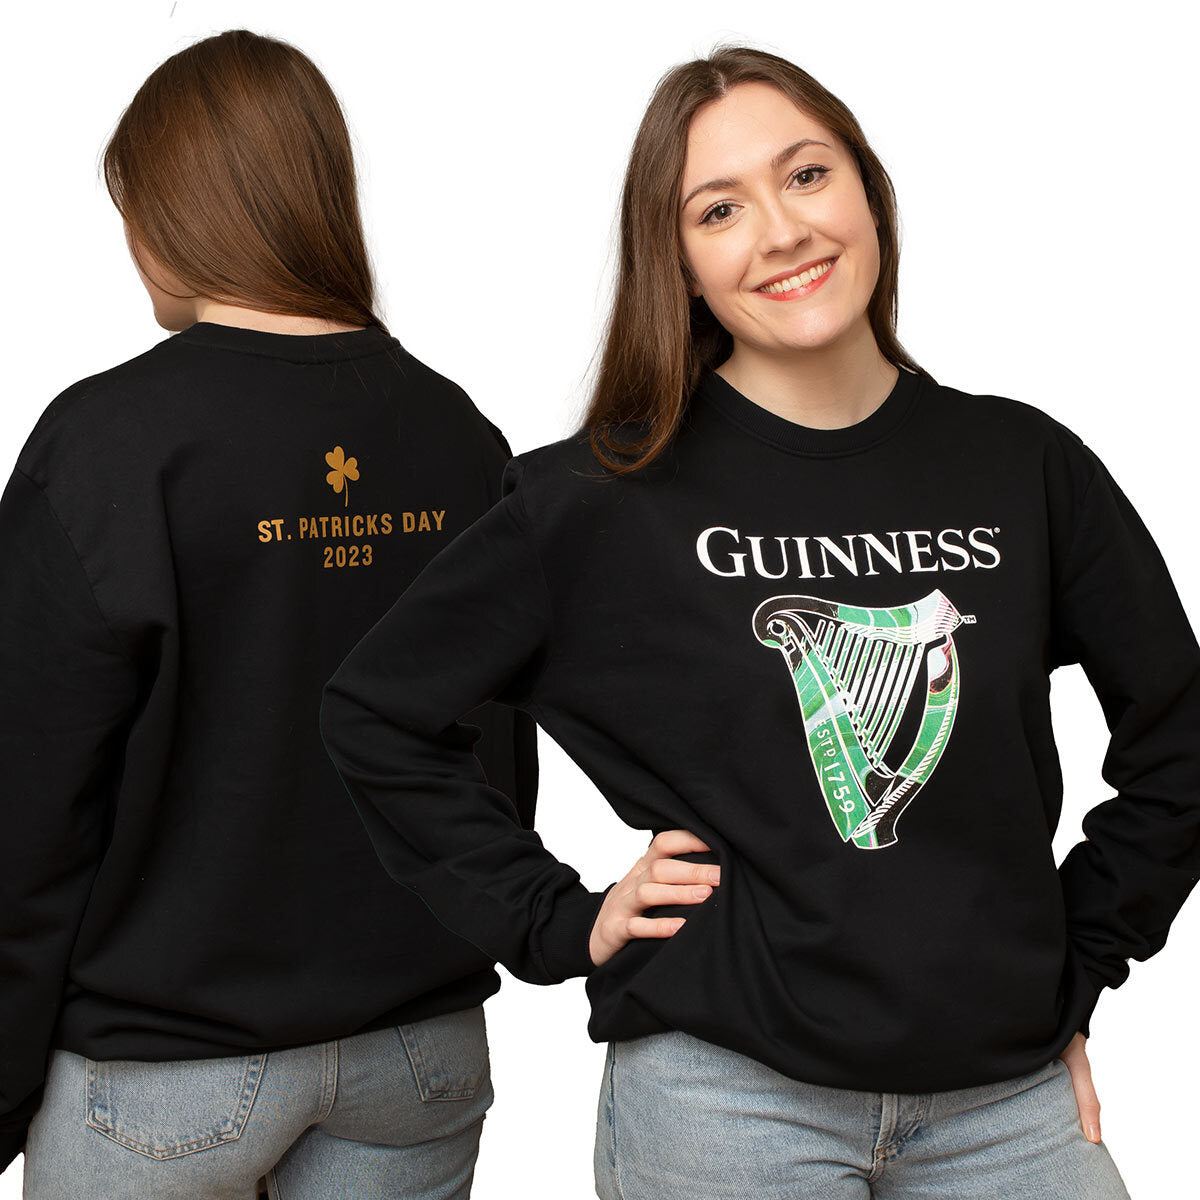 St. Patrick's Day Limited Edition Sweatshirt & White T-shirt Collection